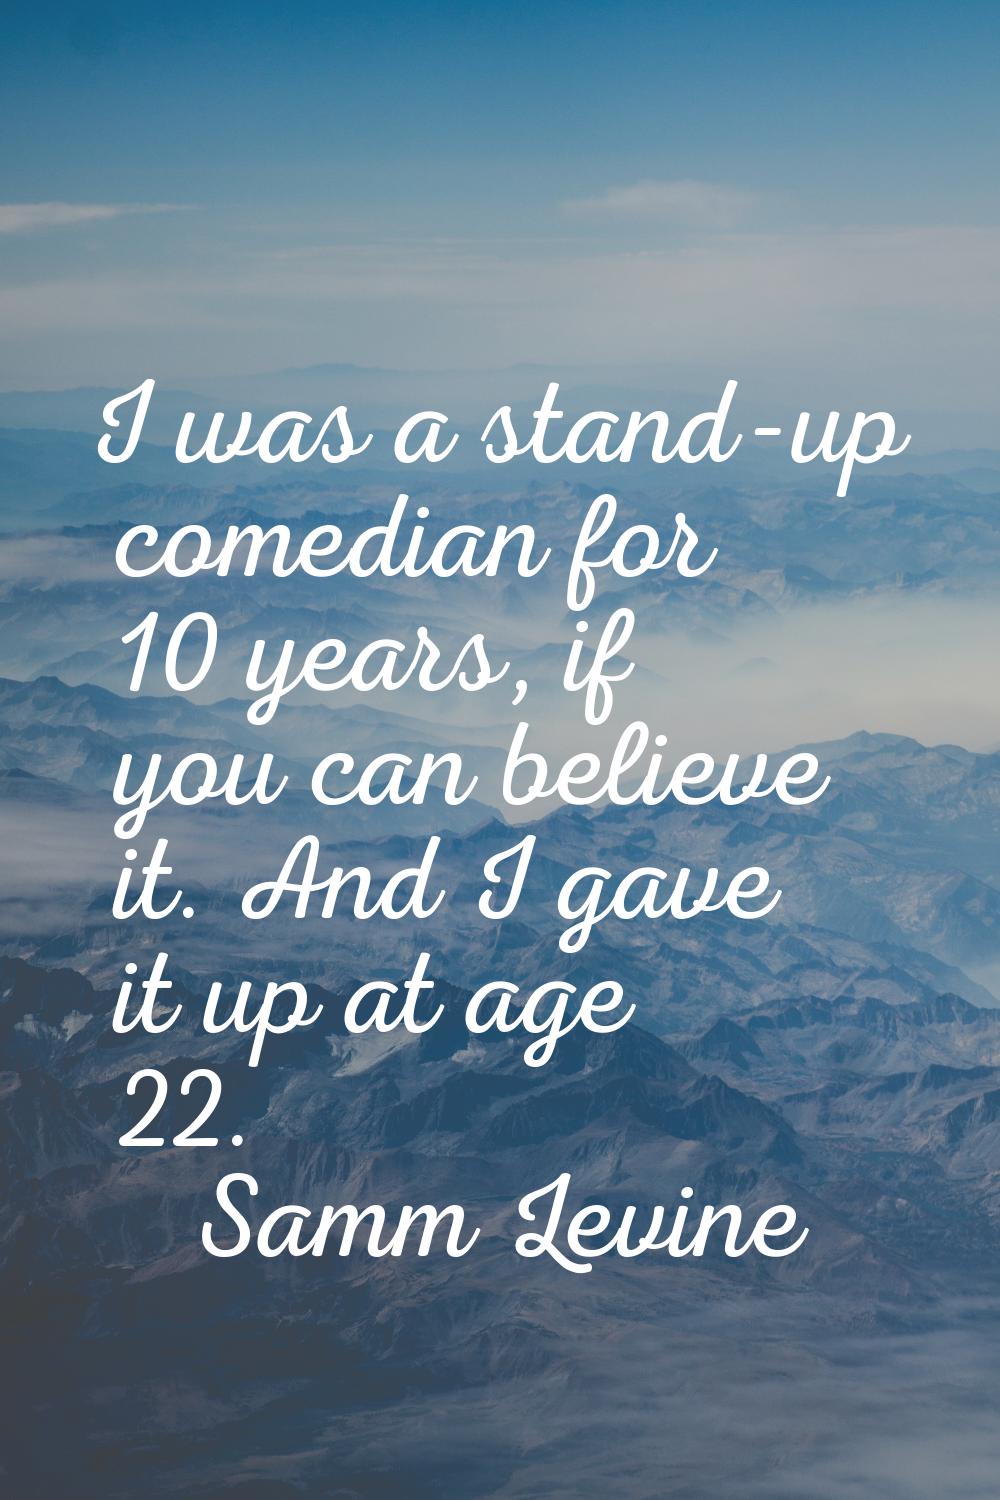 I was a stand-up comedian for 10 years, if you can believe it. And I gave it up at age 22.